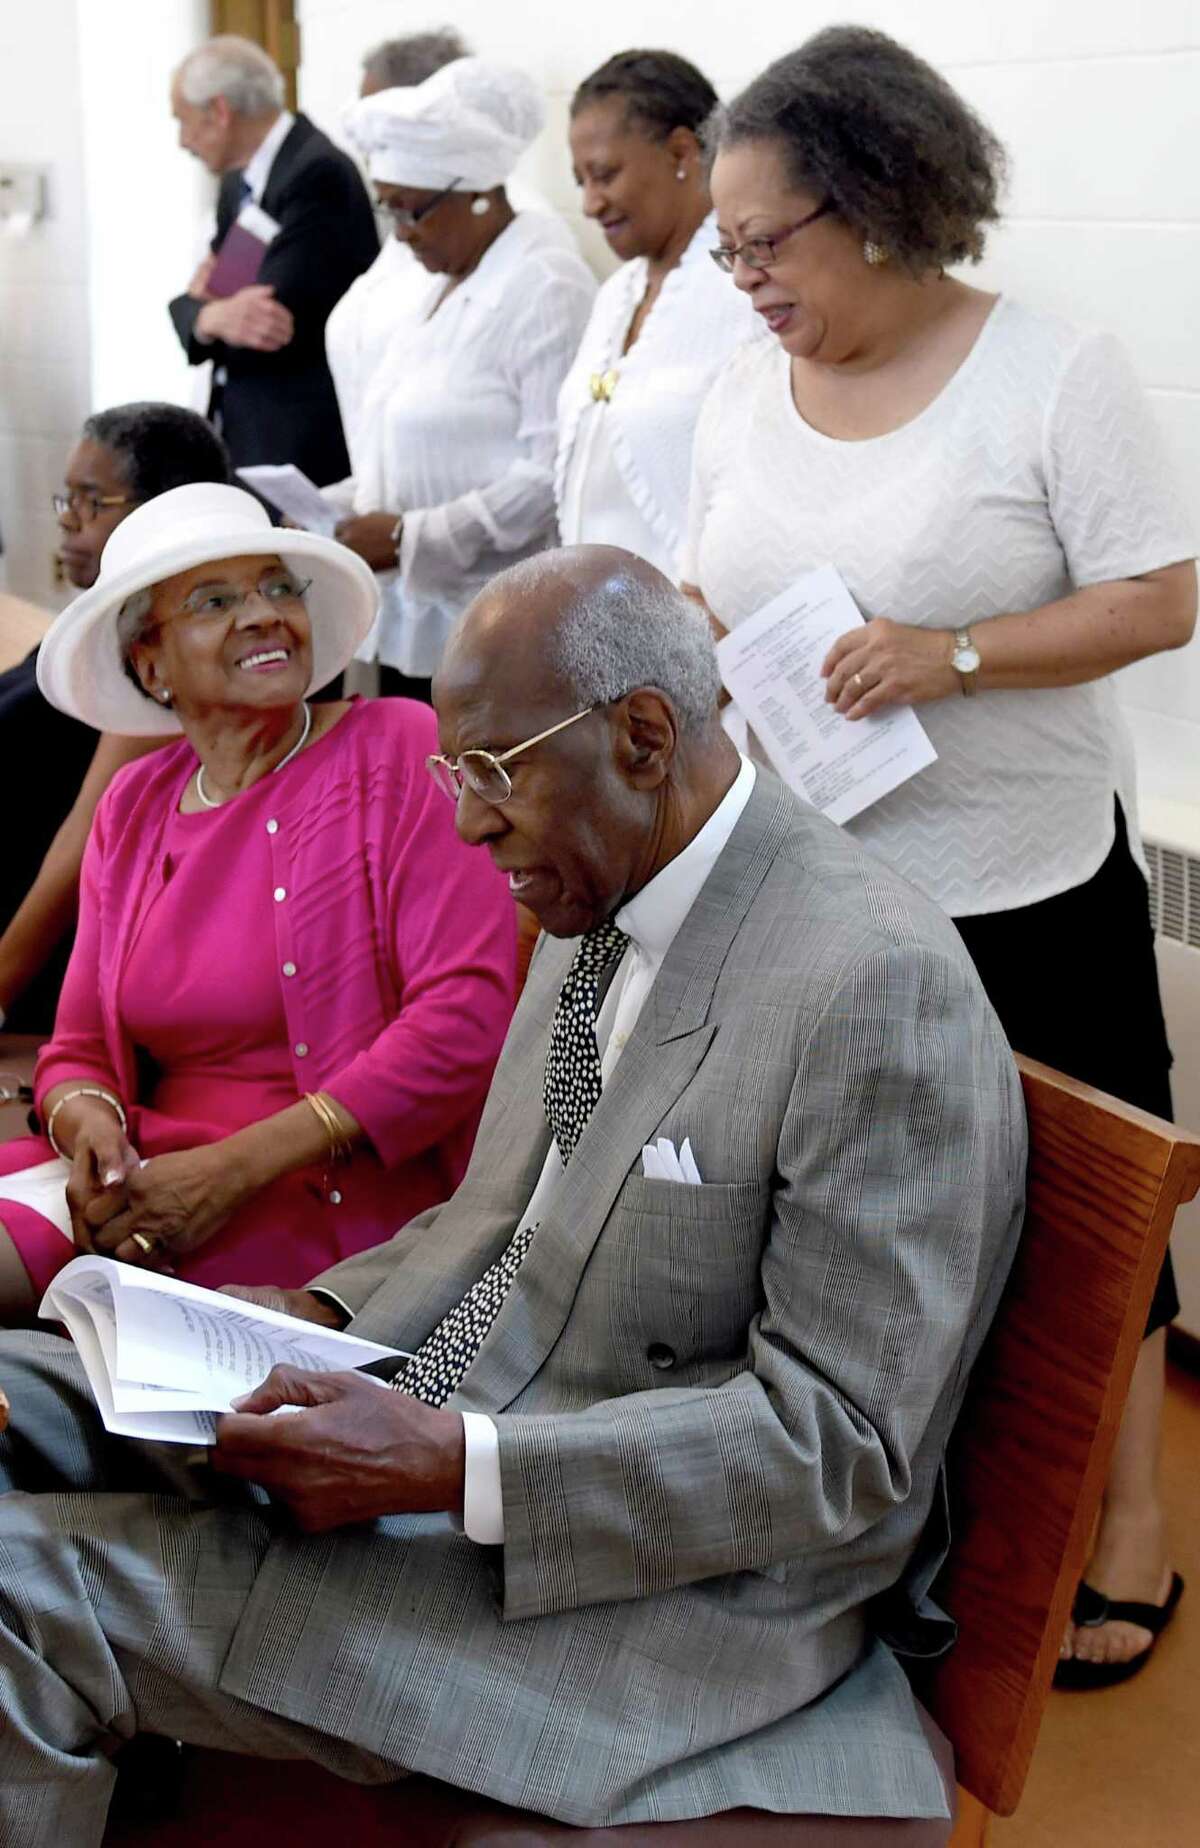 In this file photo, choir member Sharyn Esdaile, right, with Jan Parker, left, and her husband, former State Treasurer Henry Parker, during a church service at the Dixwell United Church of Christ in New Haven in 2015.